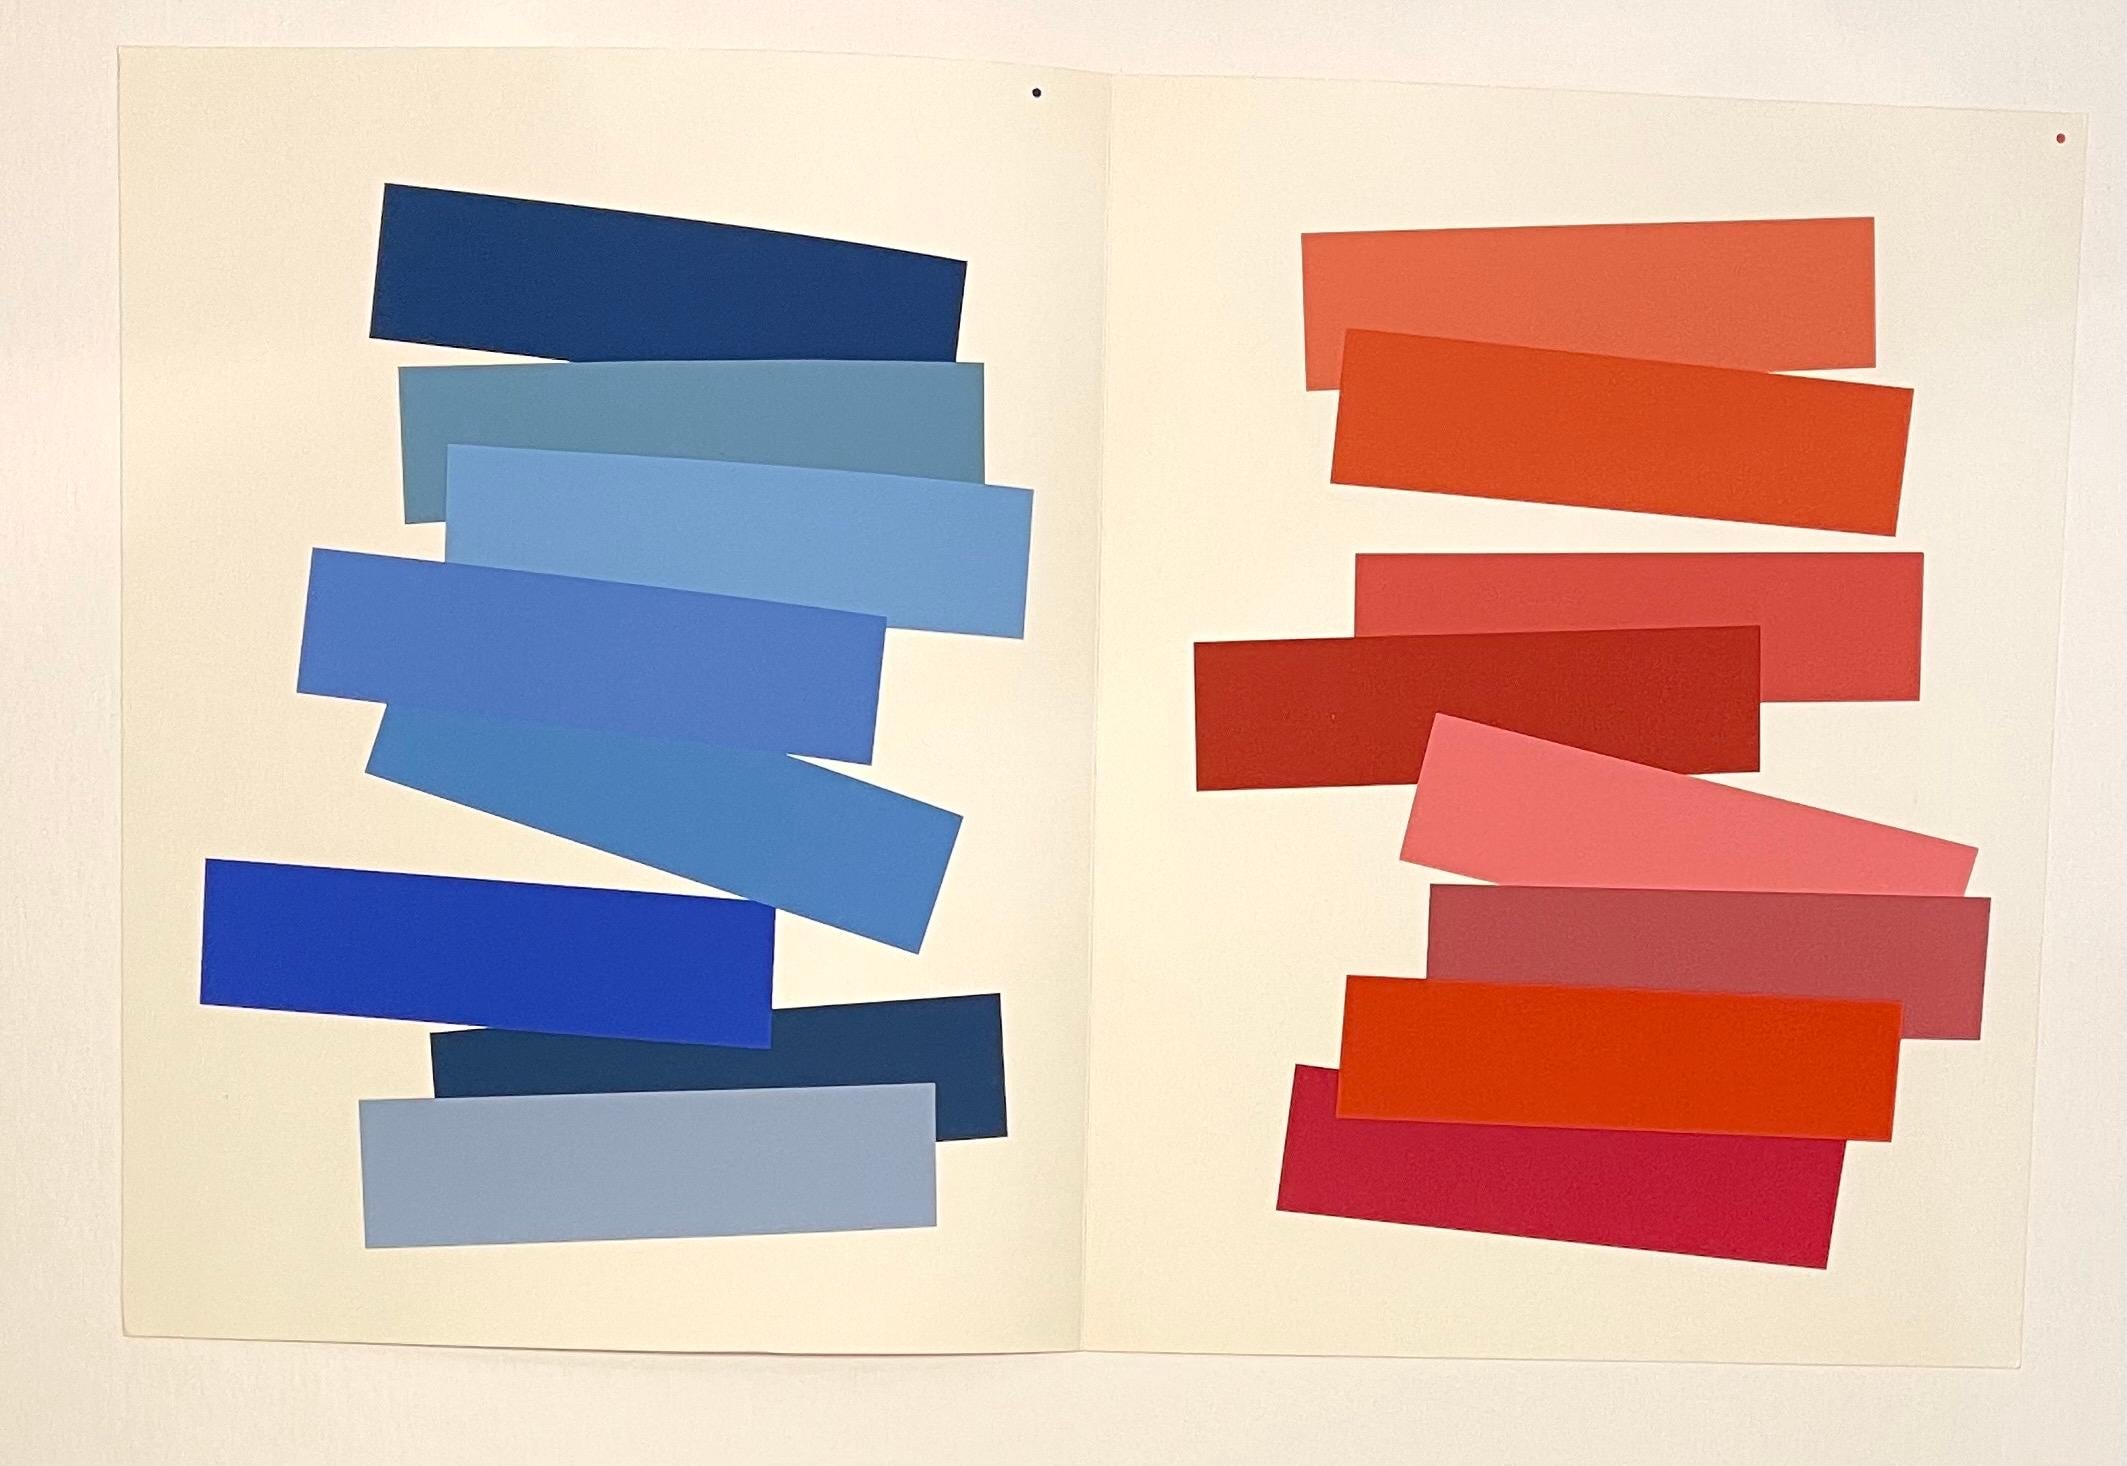 THE INTERACTION OF COLOR - Print by Josef Albers